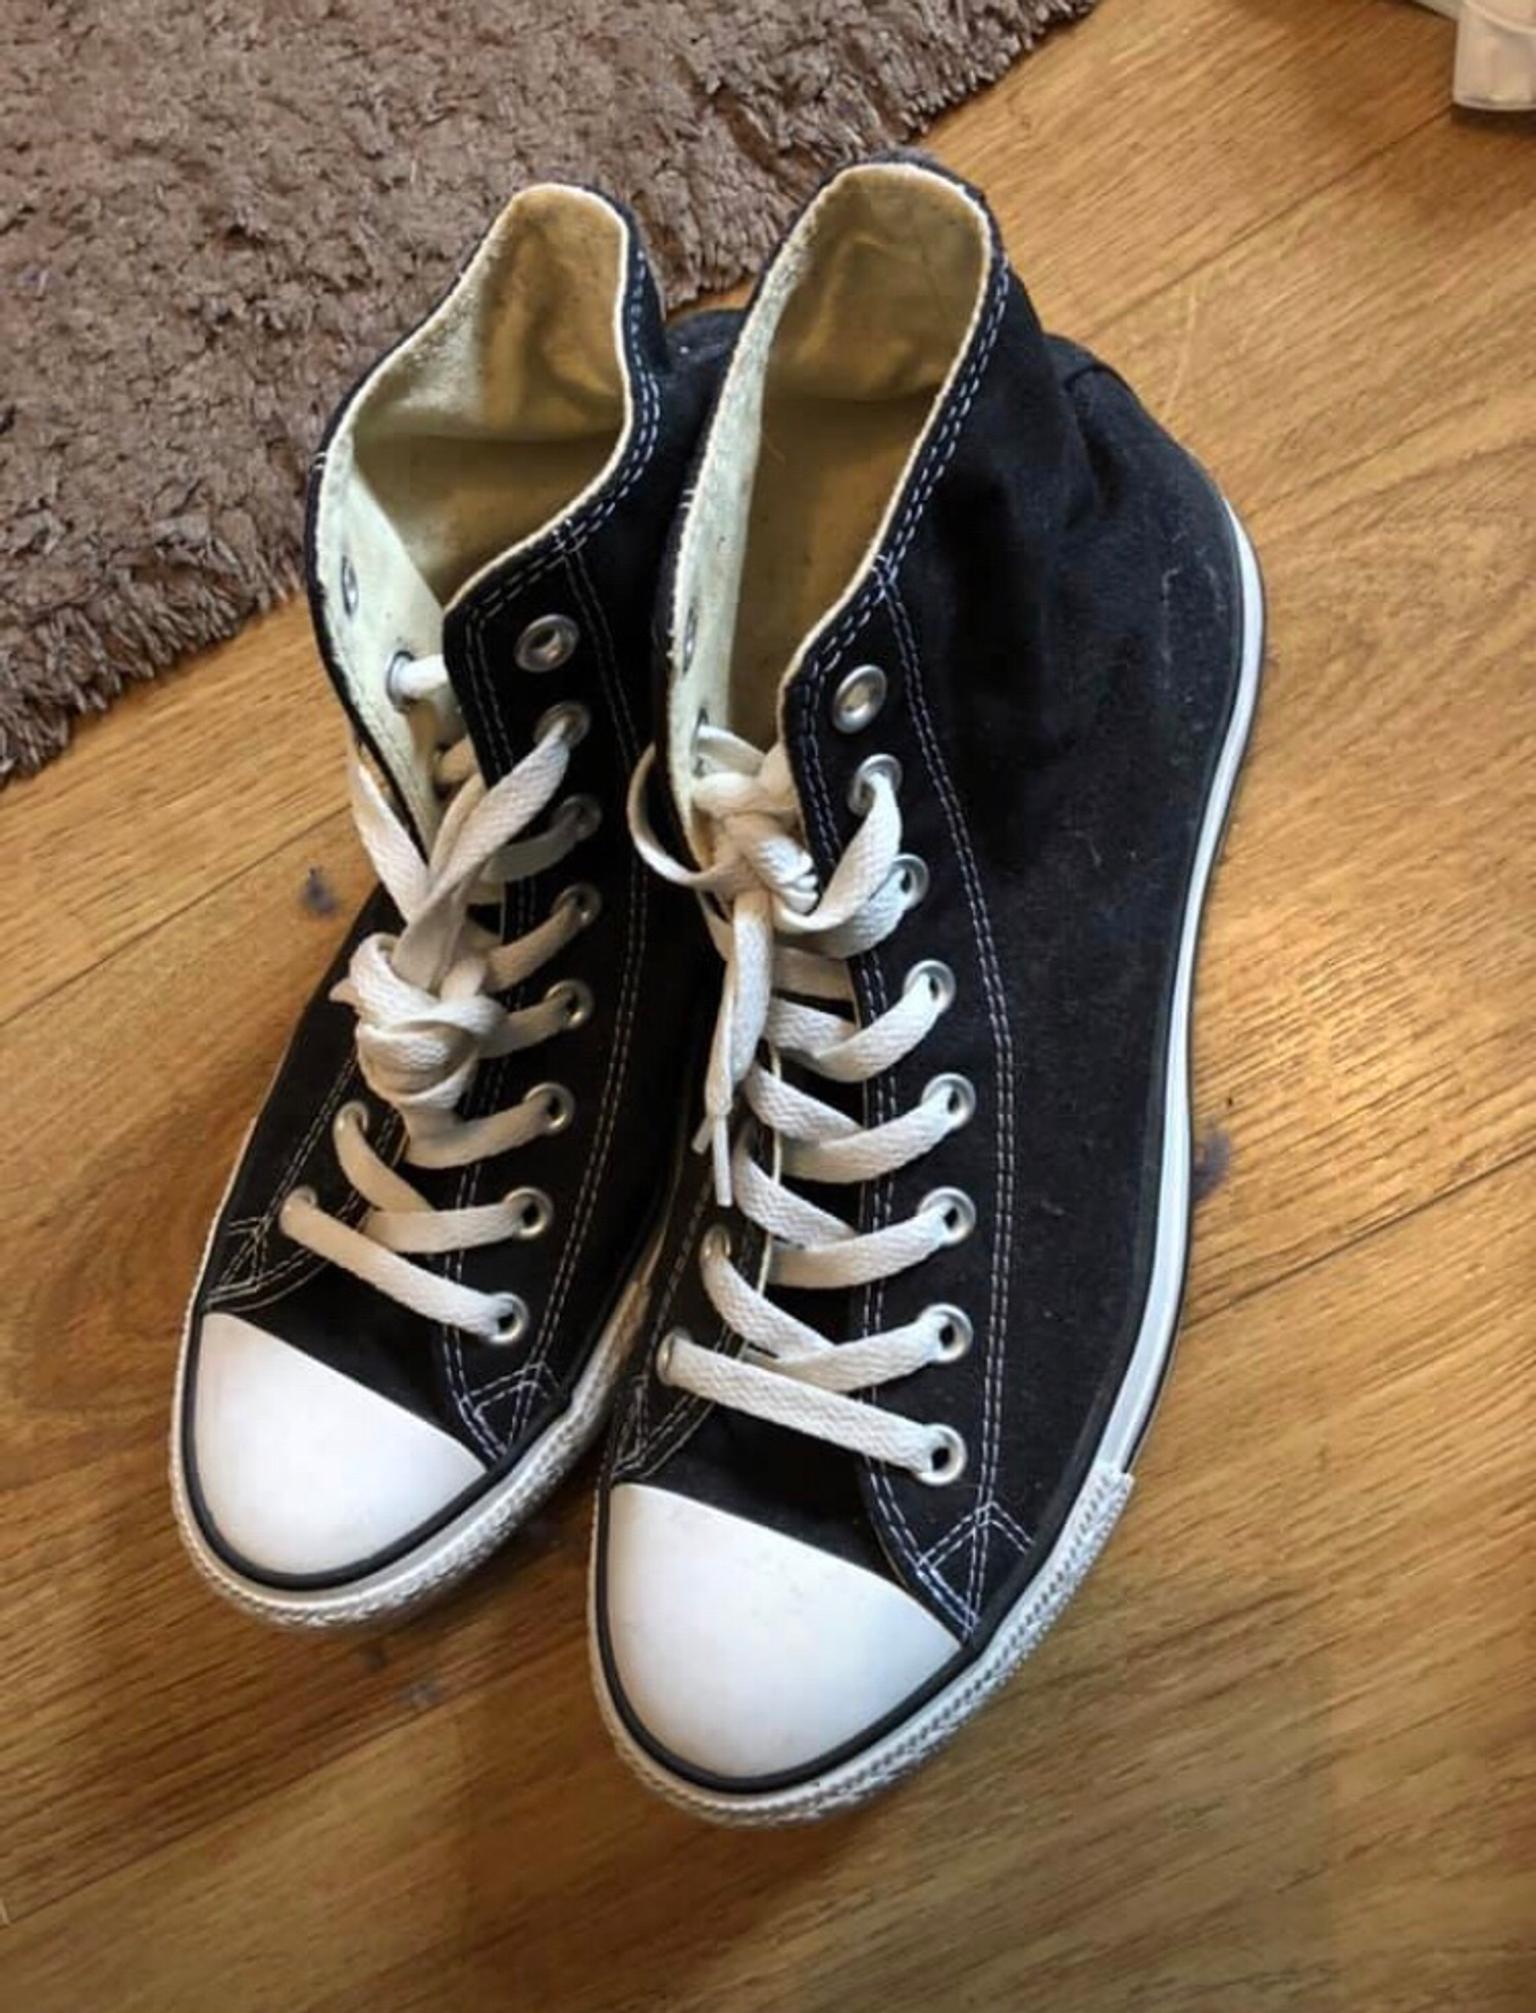 converse high tops size 9